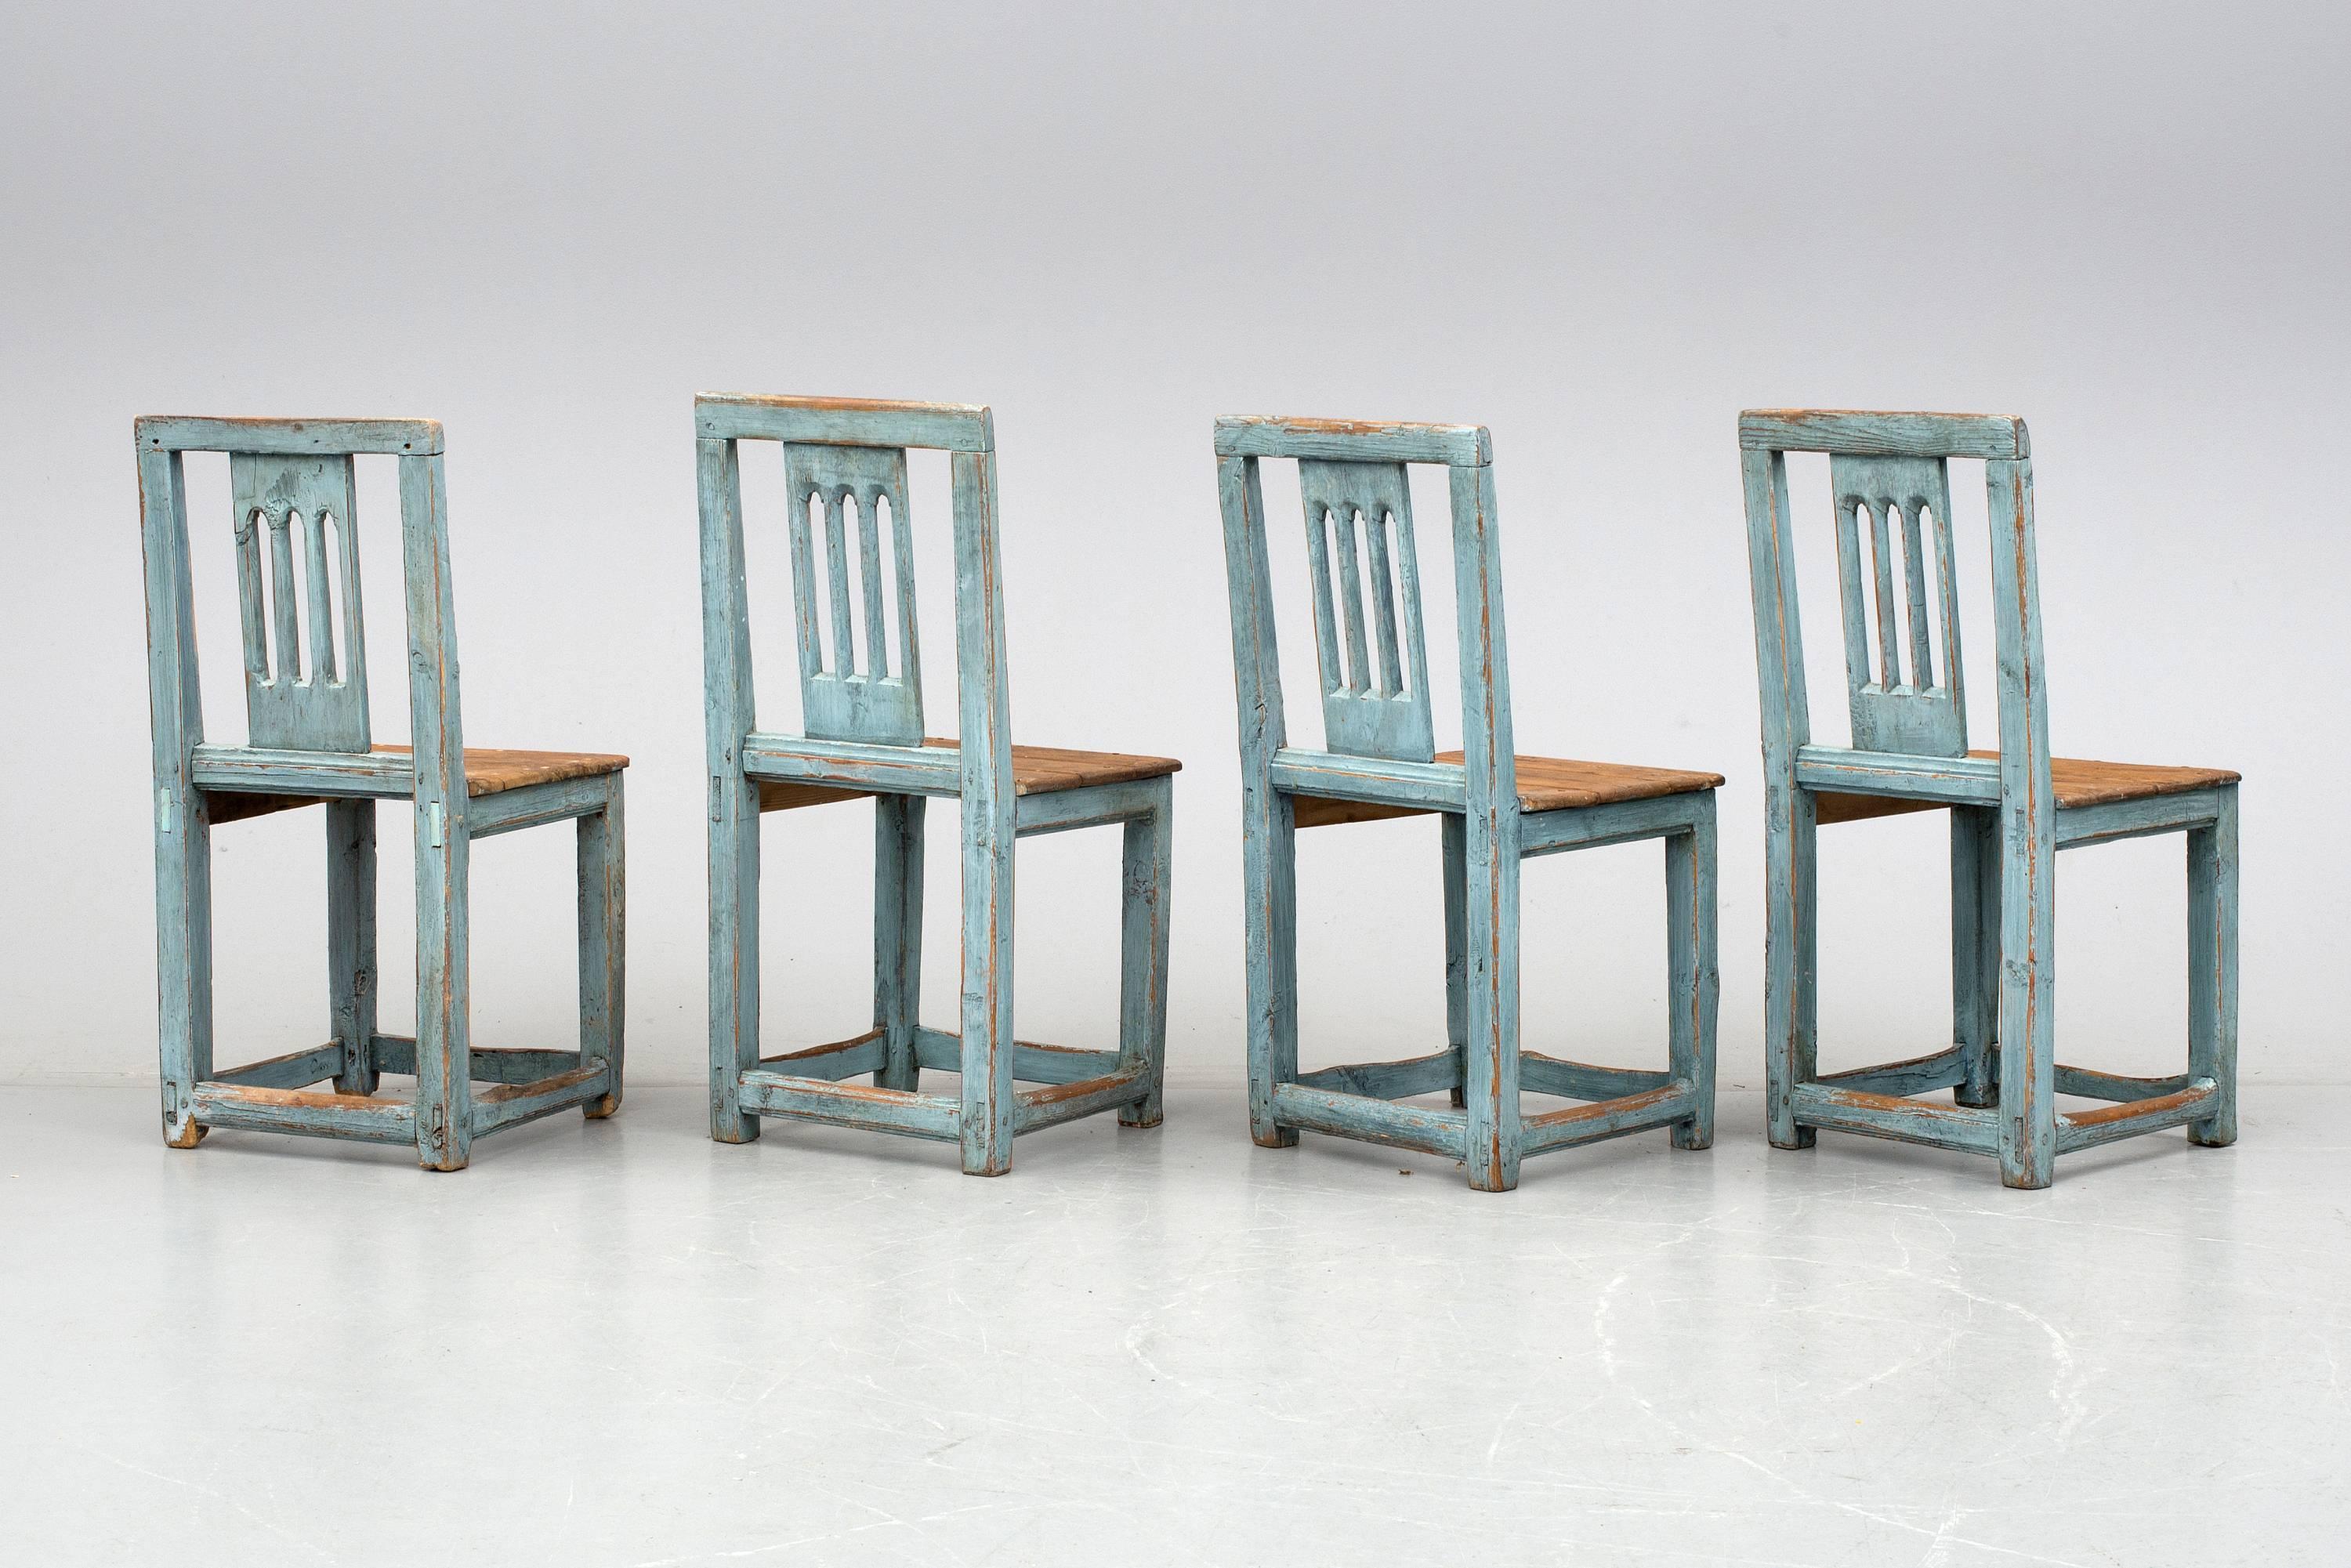 Set of four 18th century Swedish folk chairs from Hälsiagland with old blue patina. One of the chairs has text and sign written under the seat.